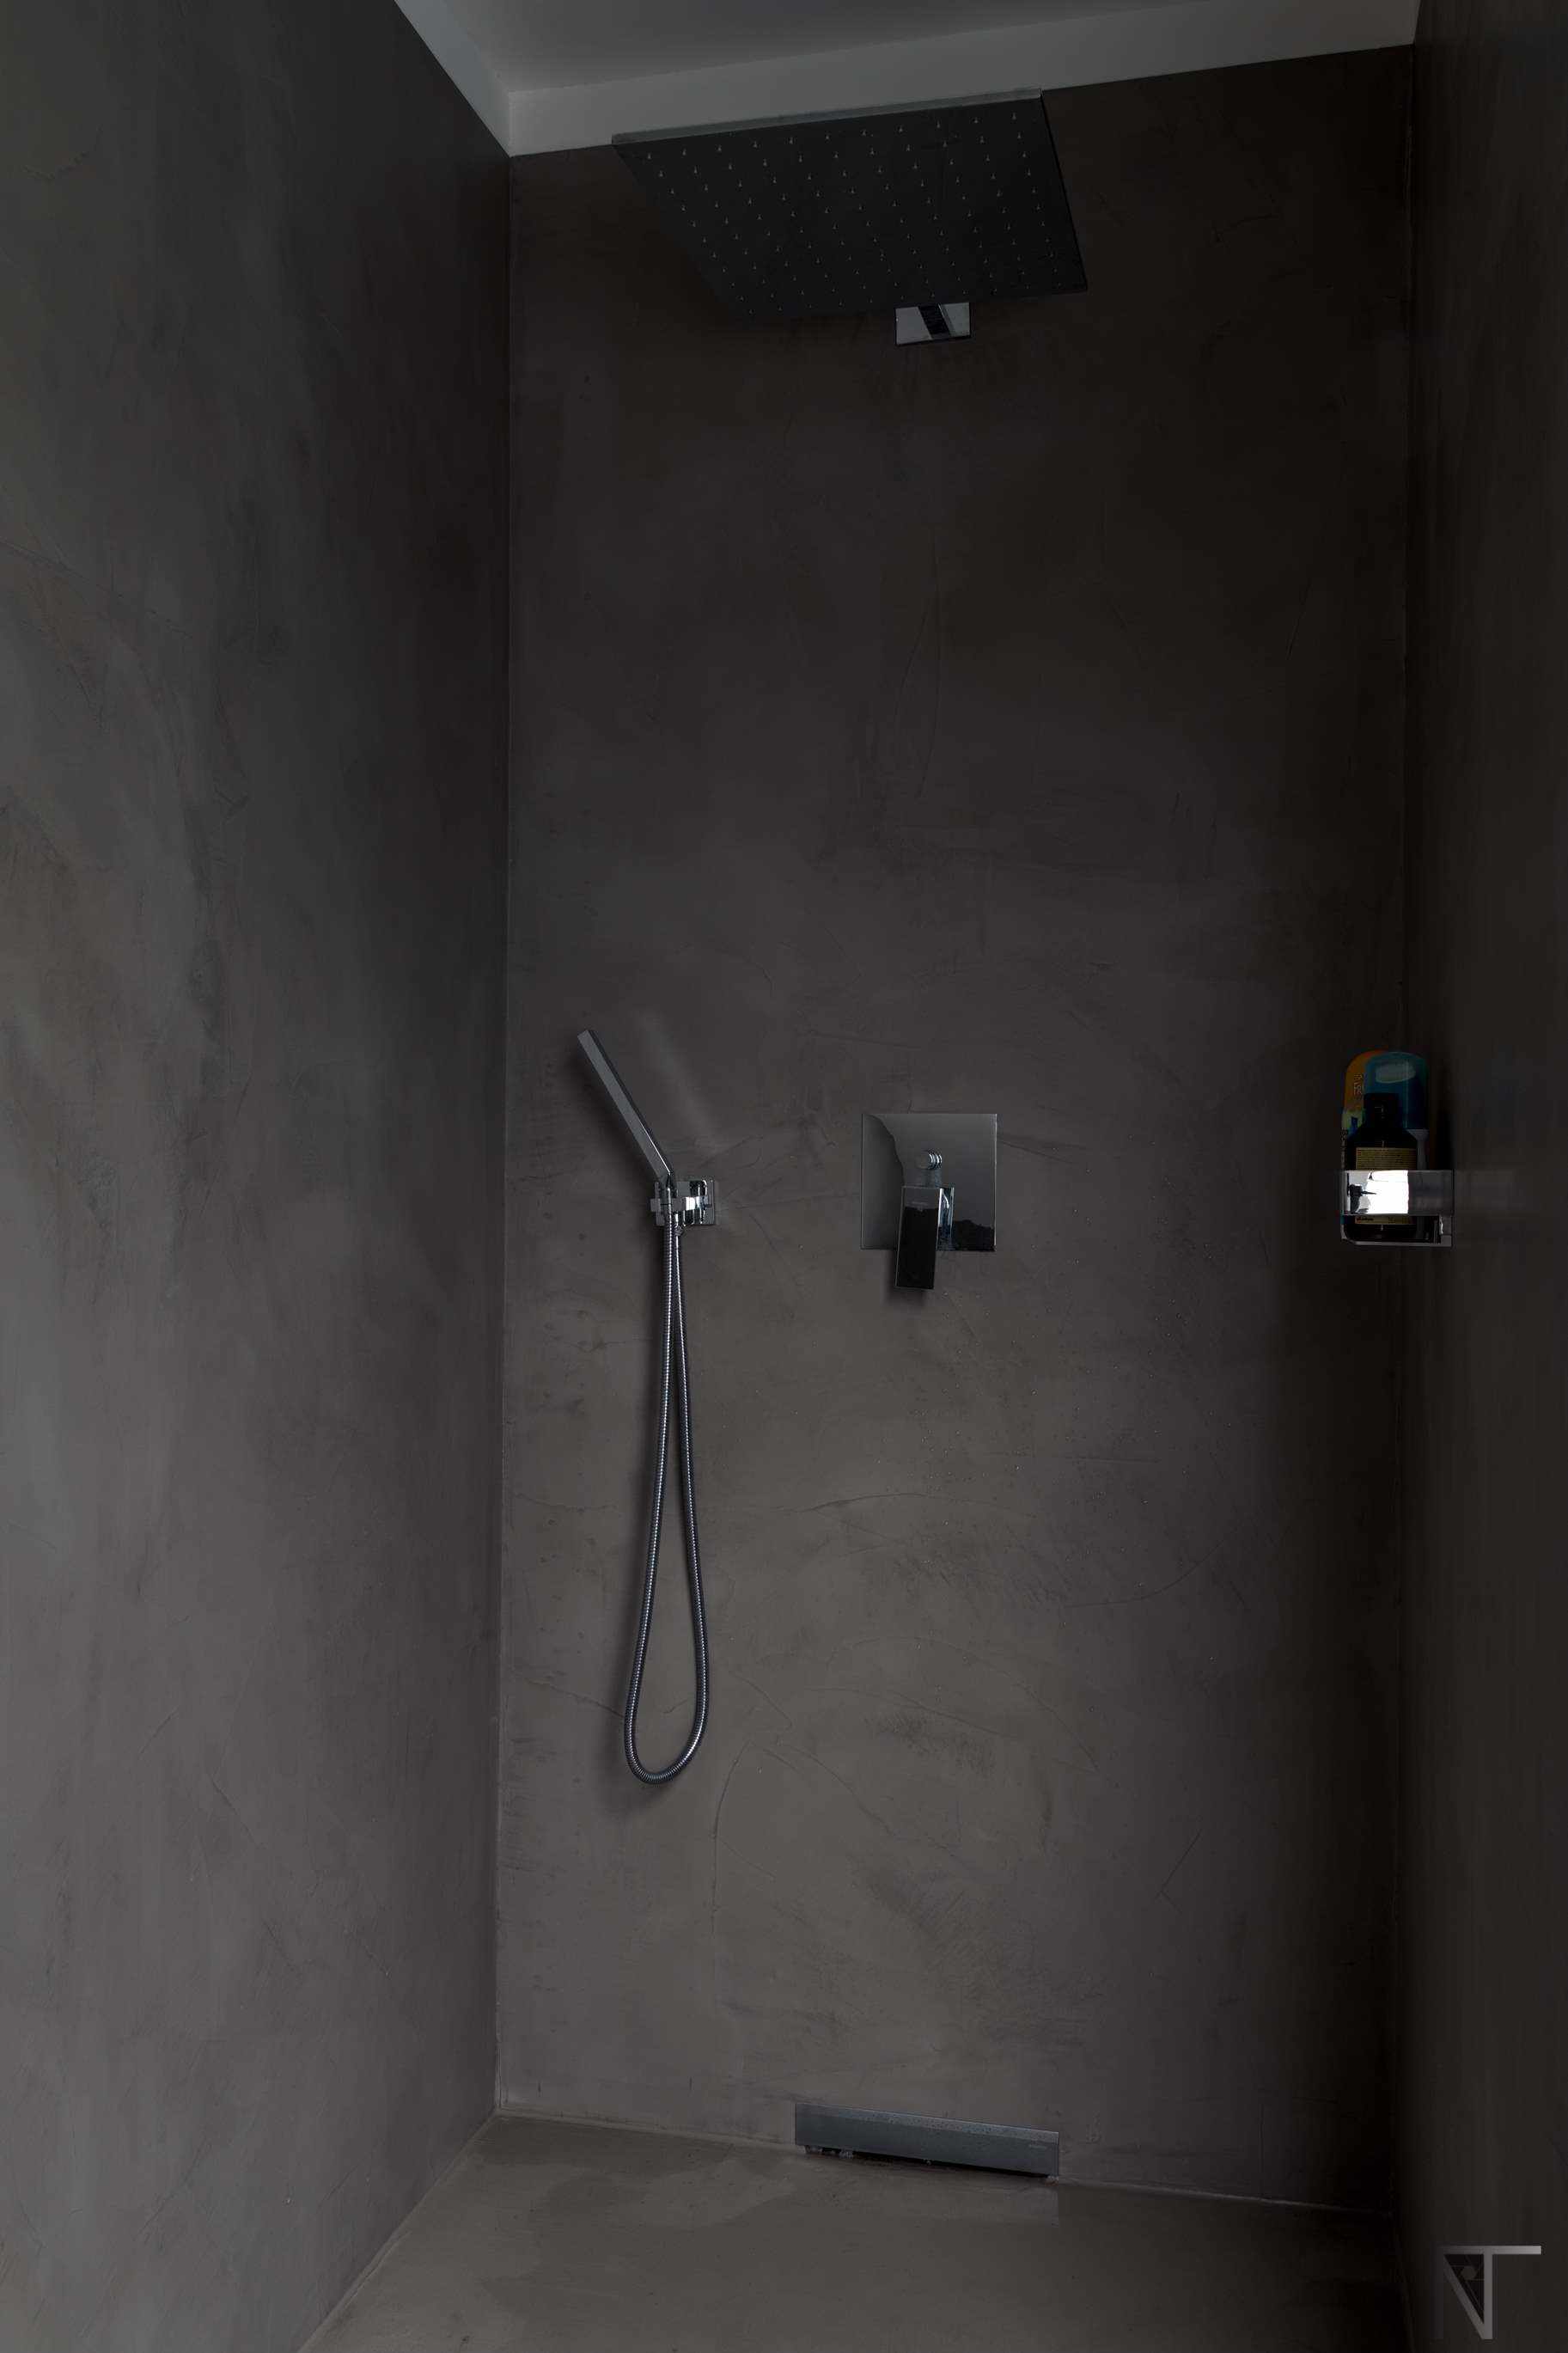 Tiled bathroom renovated with microcement in the shower